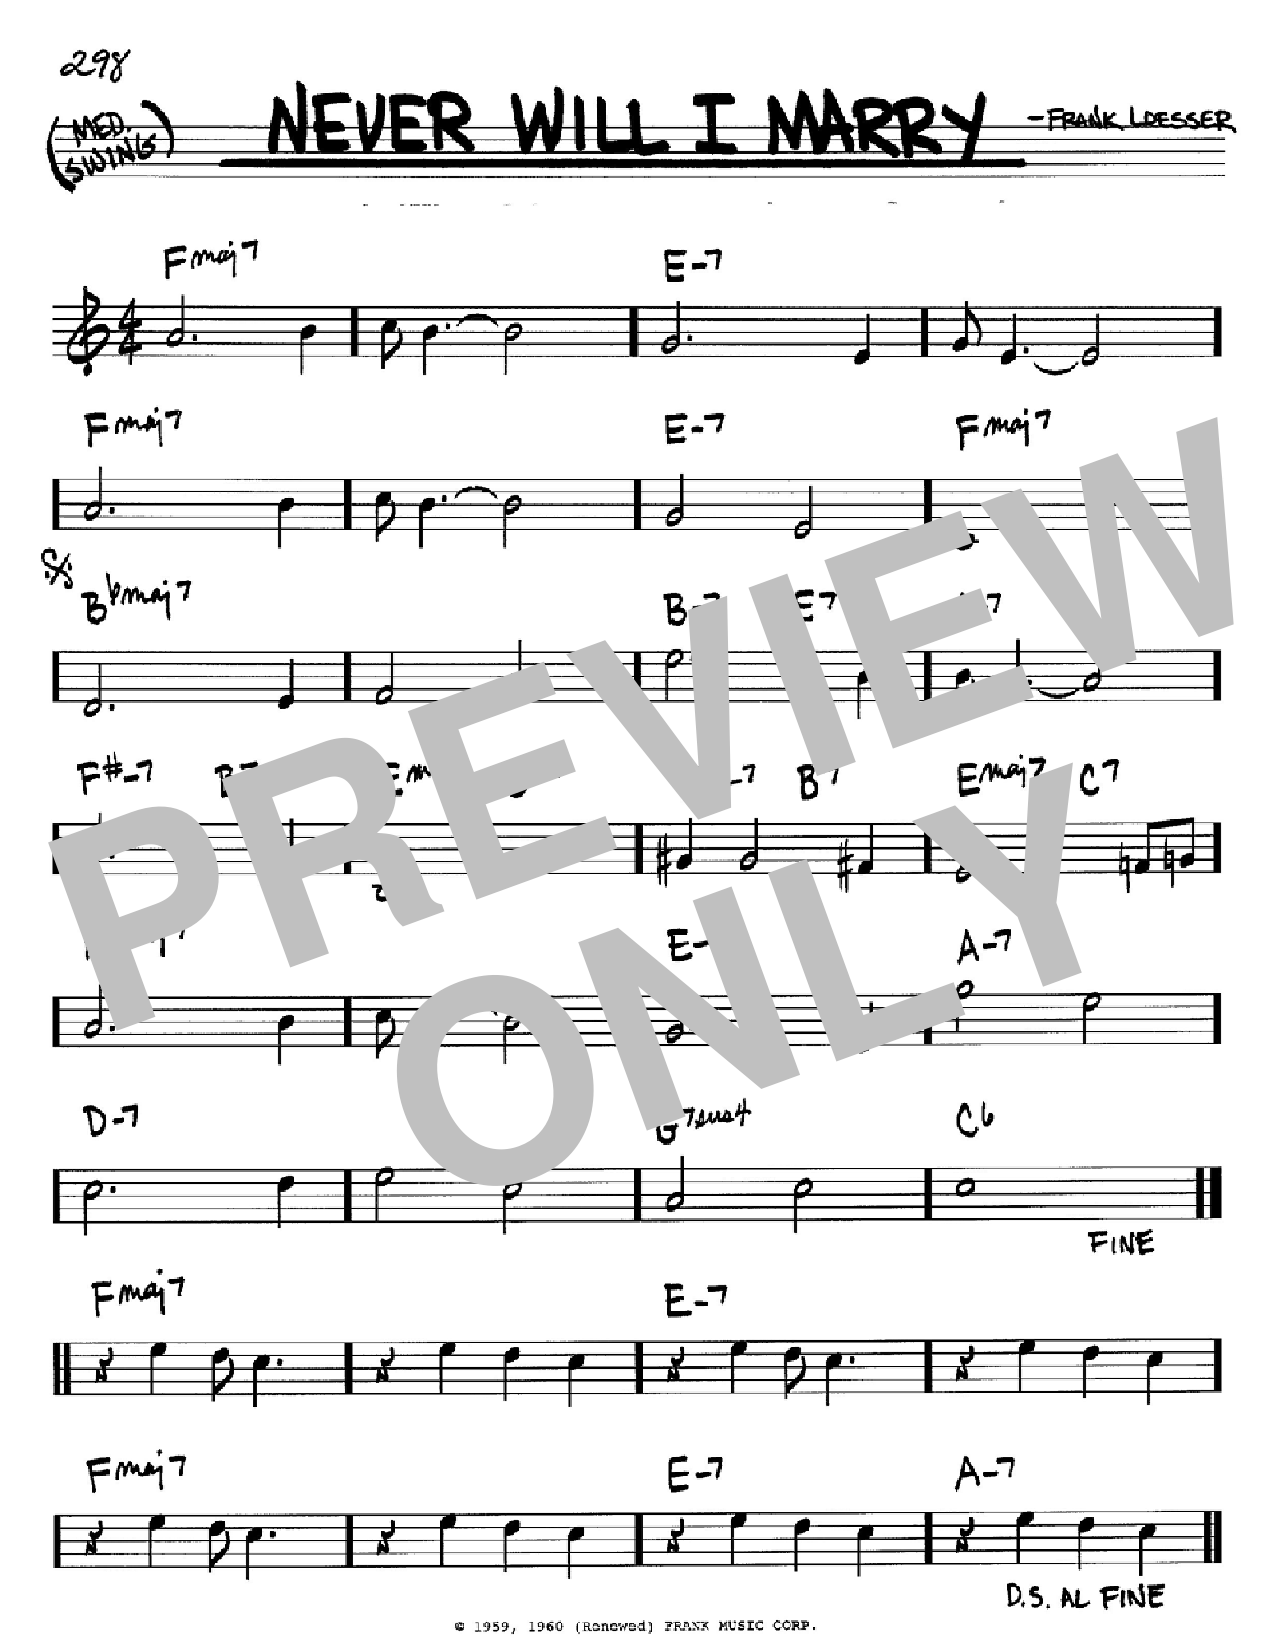 Download Frank Loesser Never Will I Marry Sheet Music